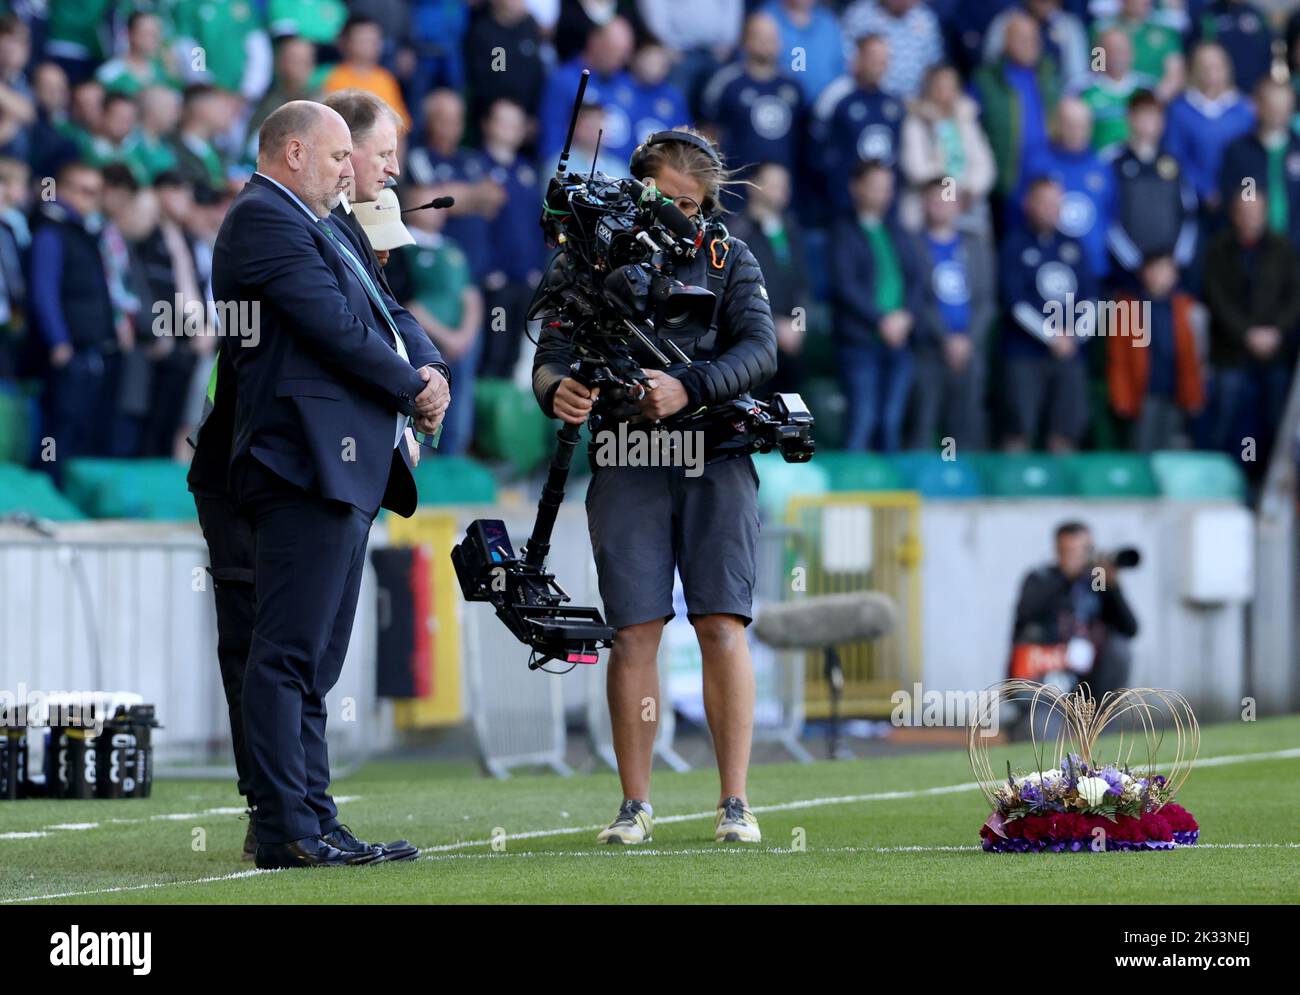 President of the Irish Football Association Conrad Kirkwood (left) after laying a wreath on the pitch in remembrance of Queen Elizabeth II before the UEFA Nations League Group J Match at Windsor Park, Belfast. Picture date: Saturday September 24, 2022. Stock Photo